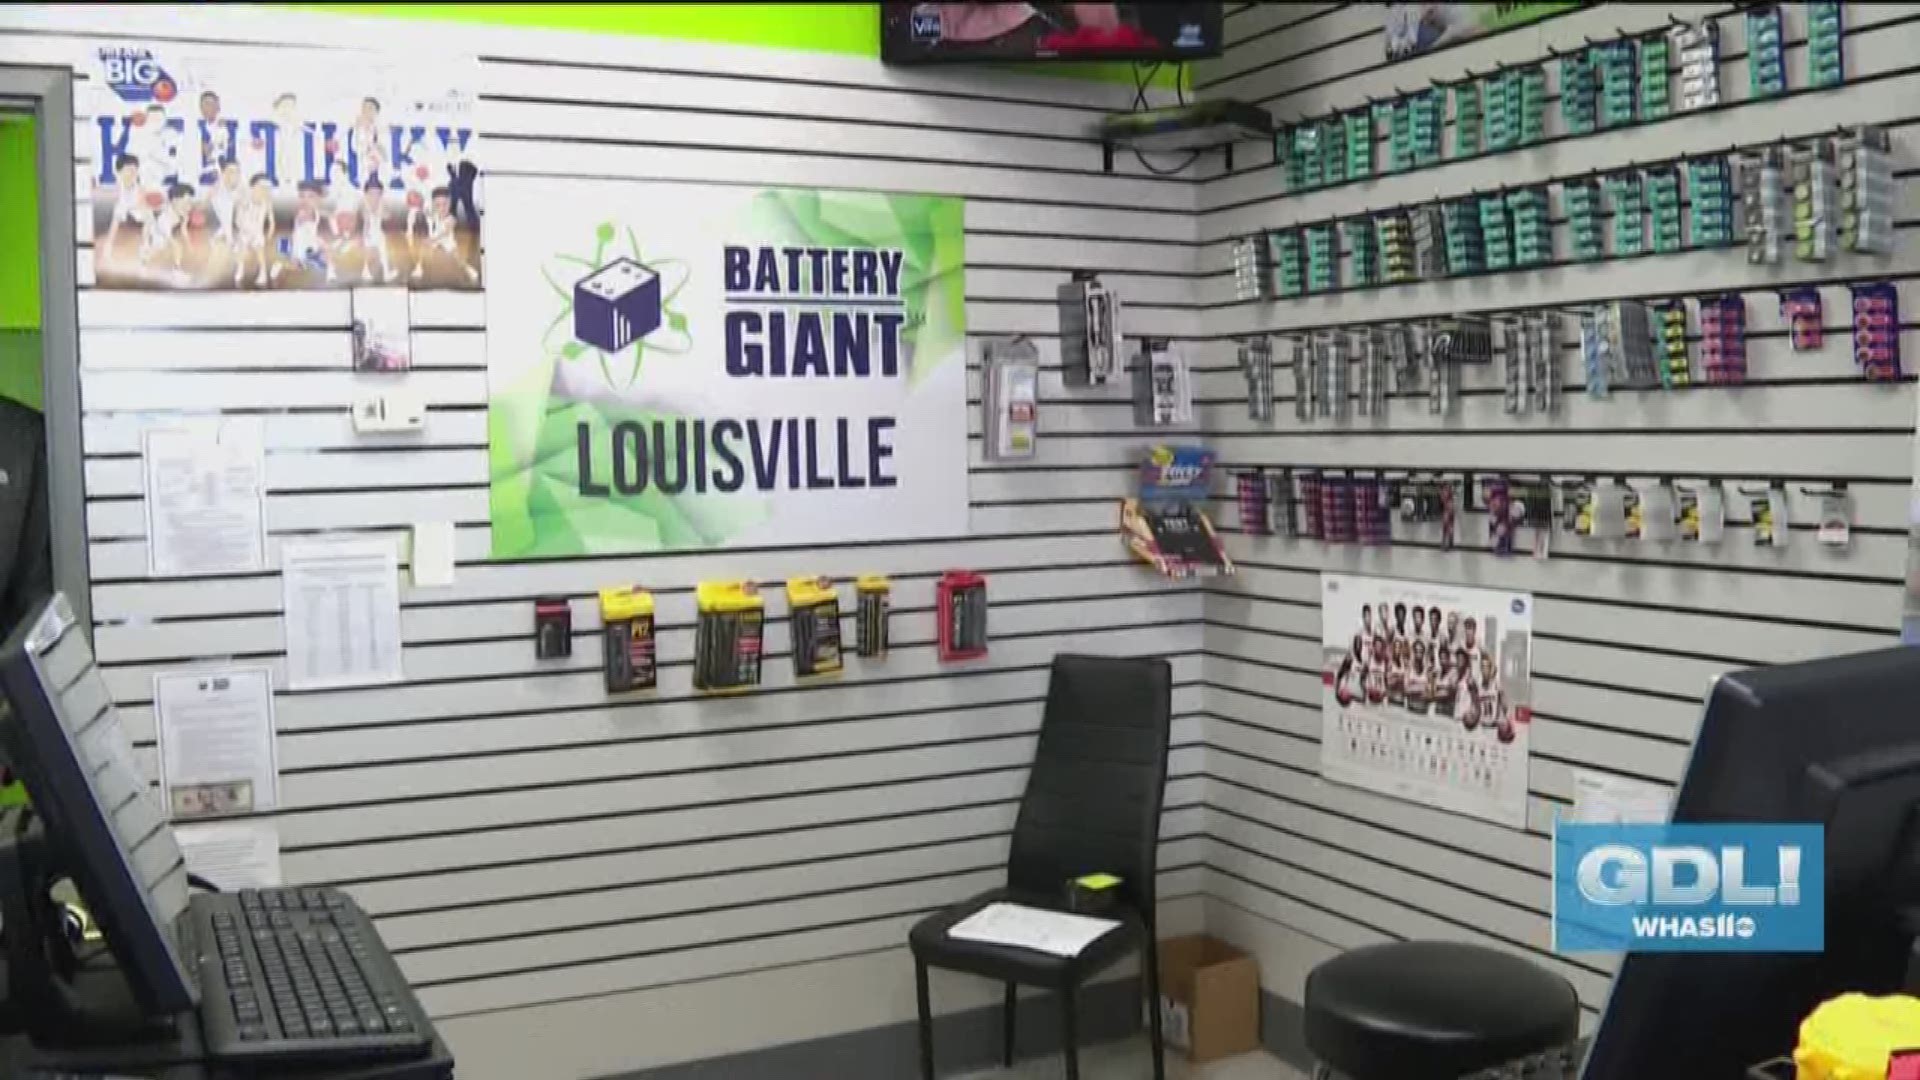 Battery Giant is located at 12418 La Grange Road in Louisville, KY.